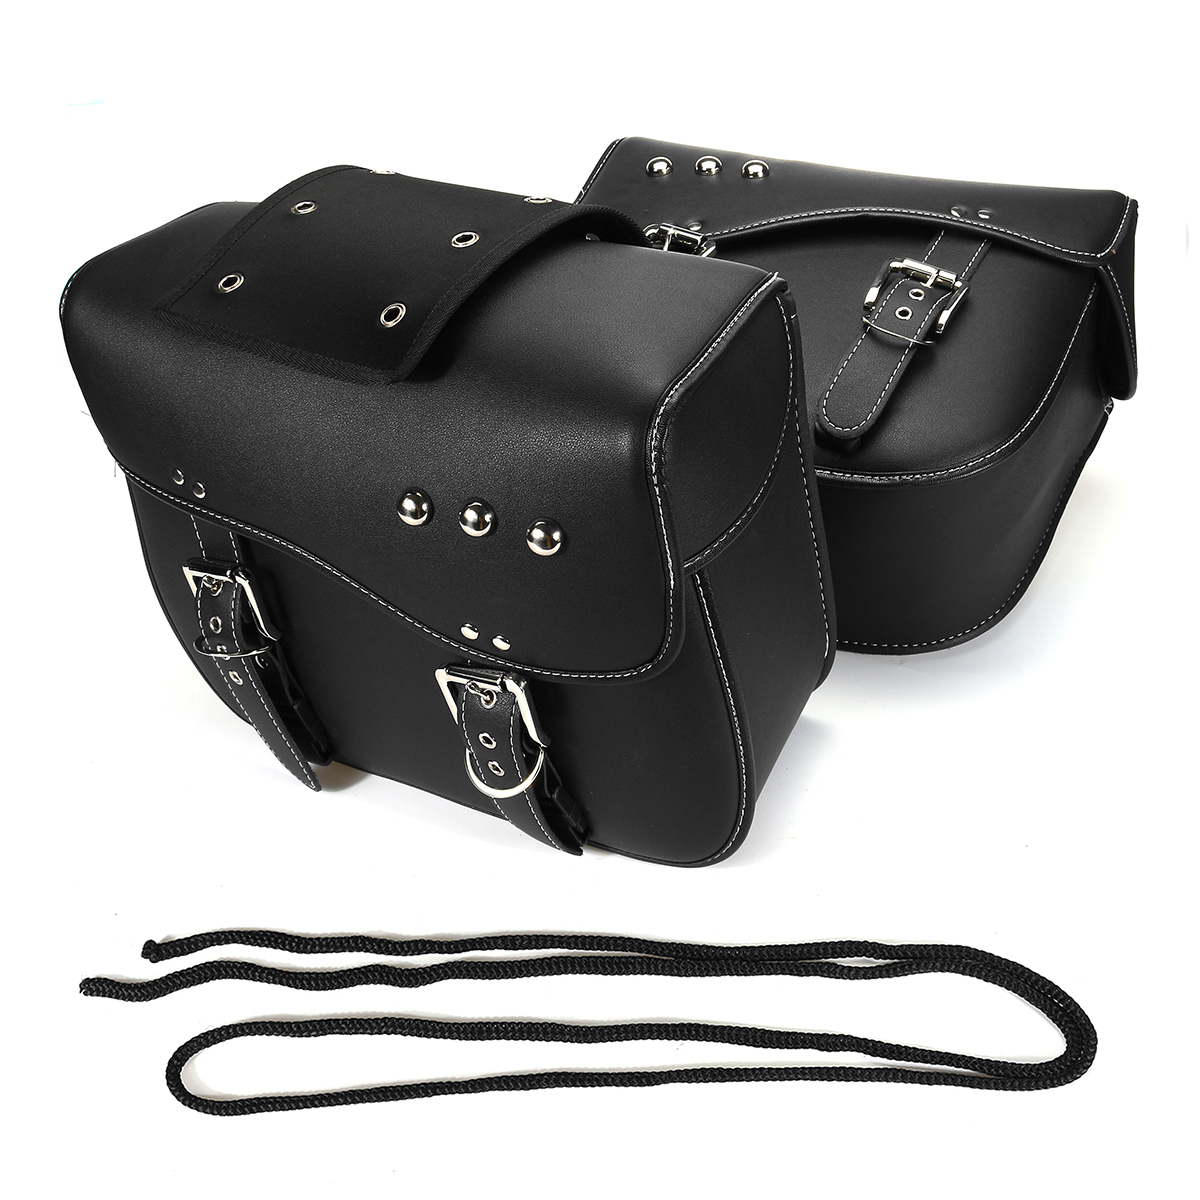 

PU Leather Motorcycle Saddlebags Edge Package Travelling Rider Motorbike Panniers Luggage